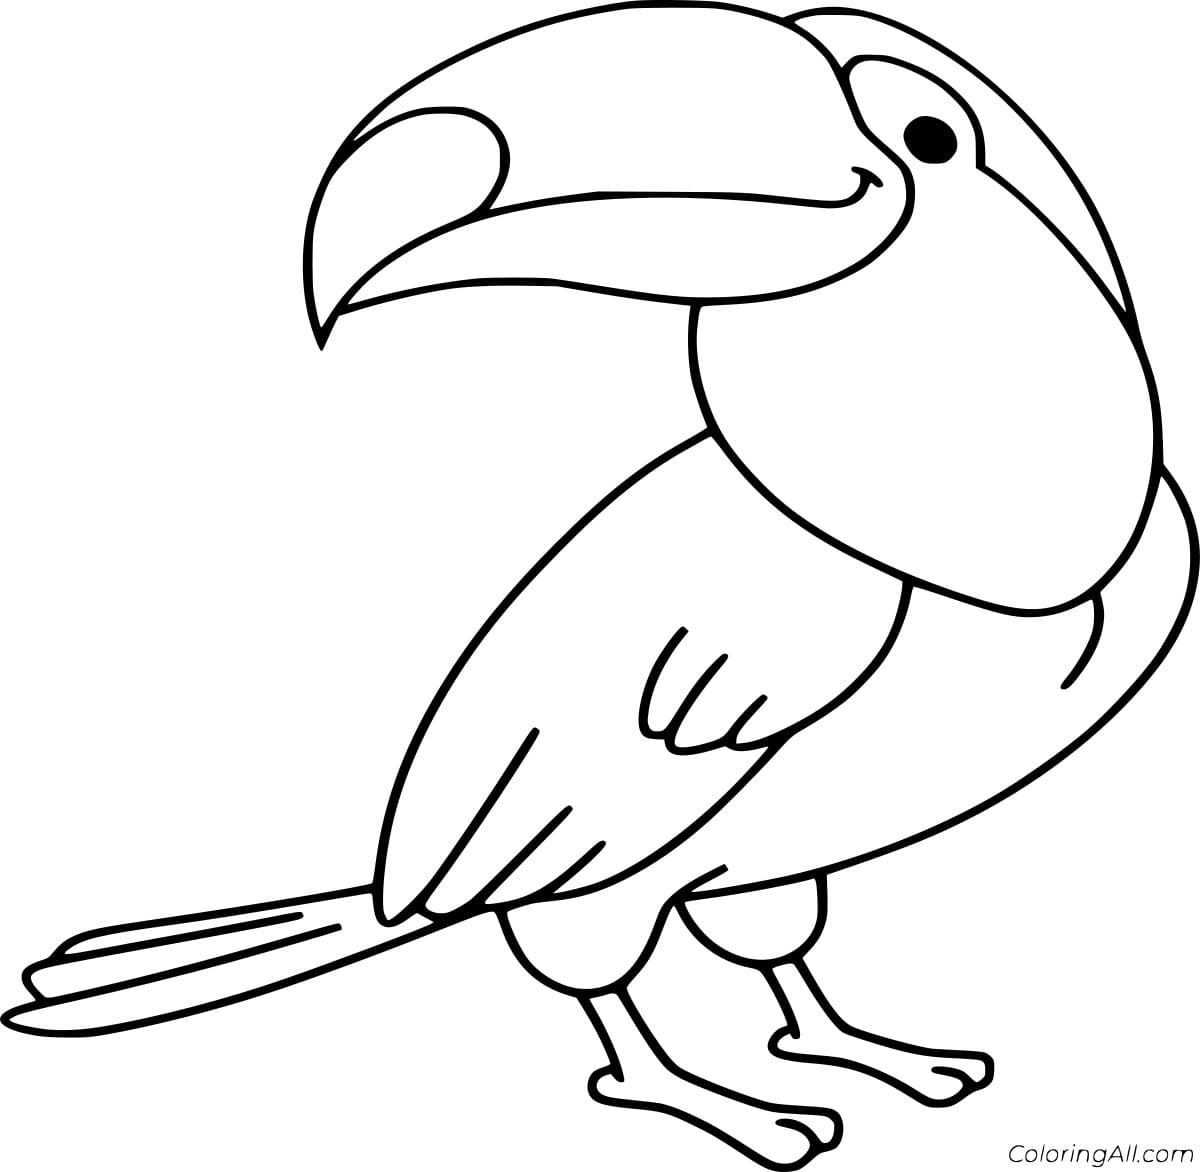 Easy Toucan Image Coloring Page